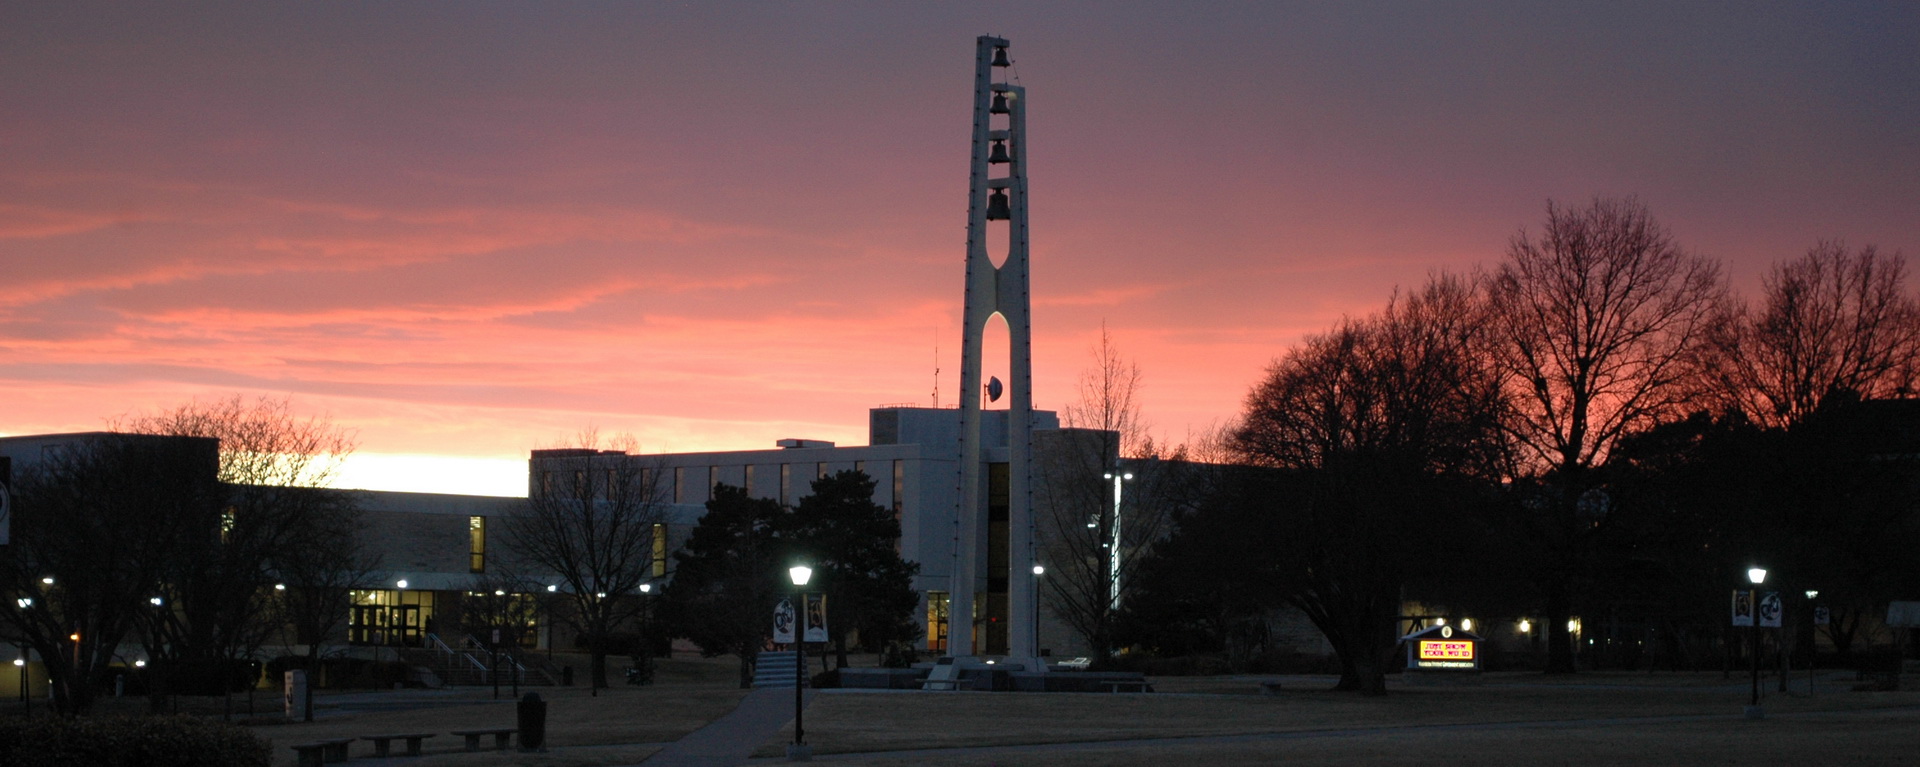 Washburn bell tower at sunset